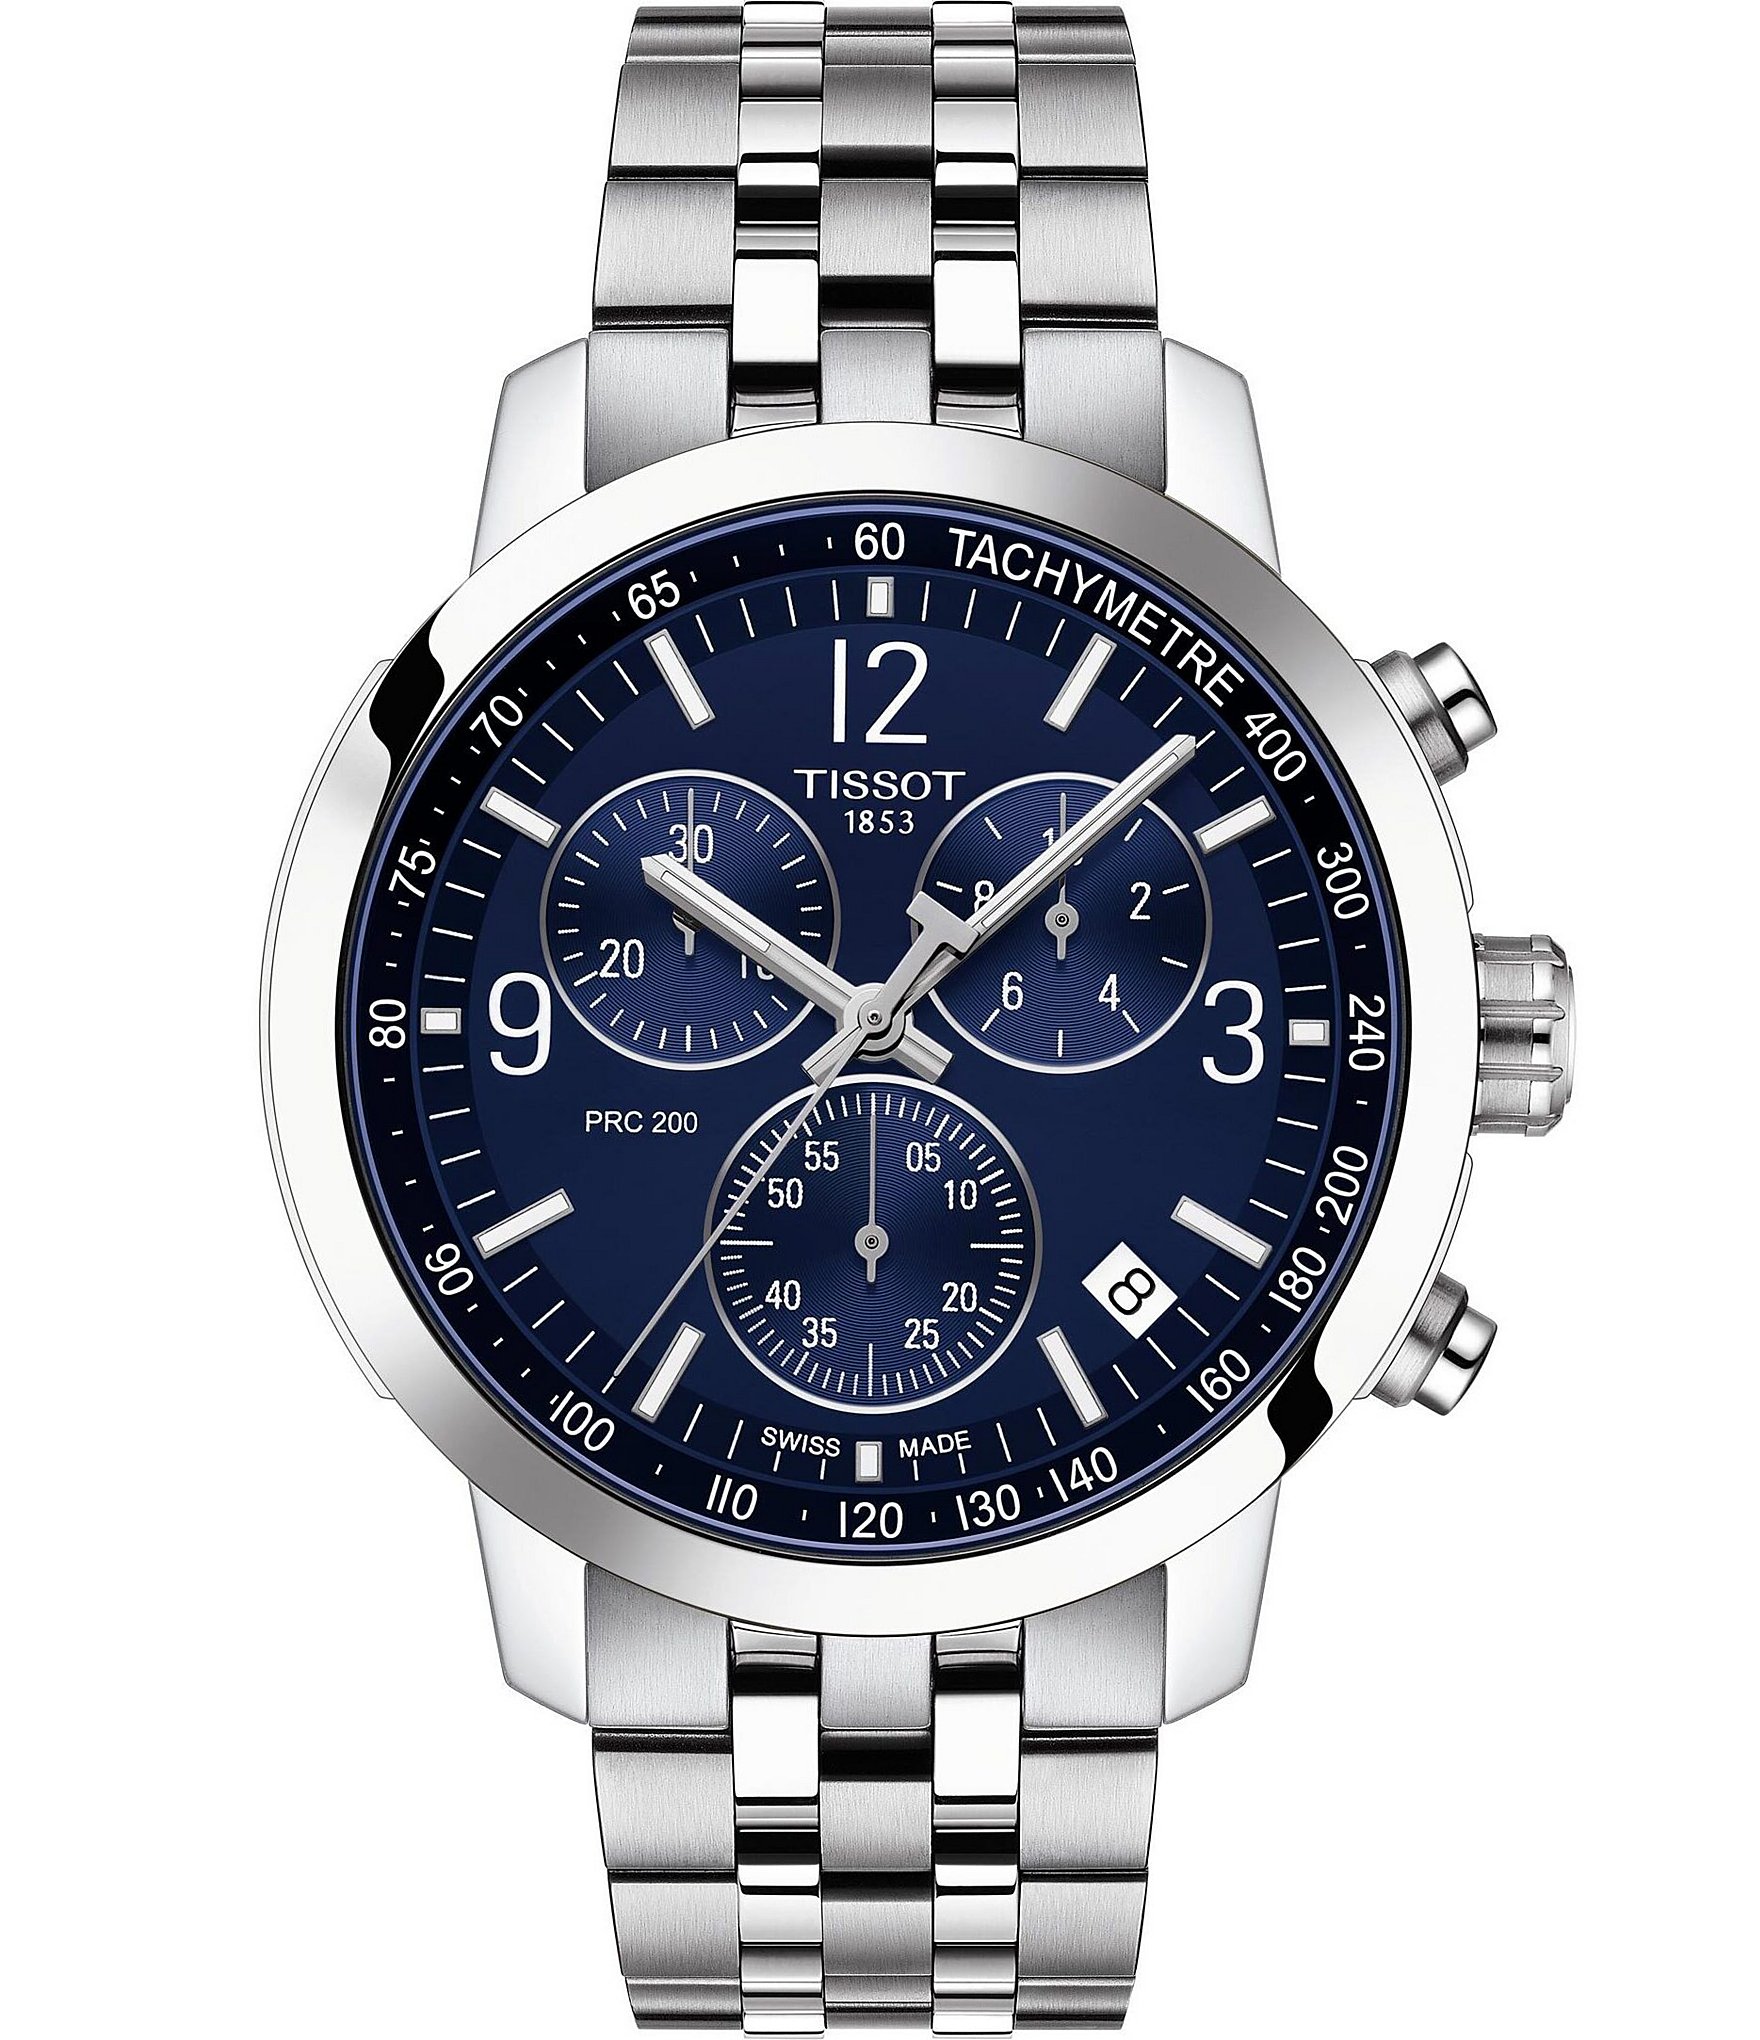 The Tissot T-Sport PRC200 Stainless Steel Men's Chronograph Watch Is 60%  Off - IGN